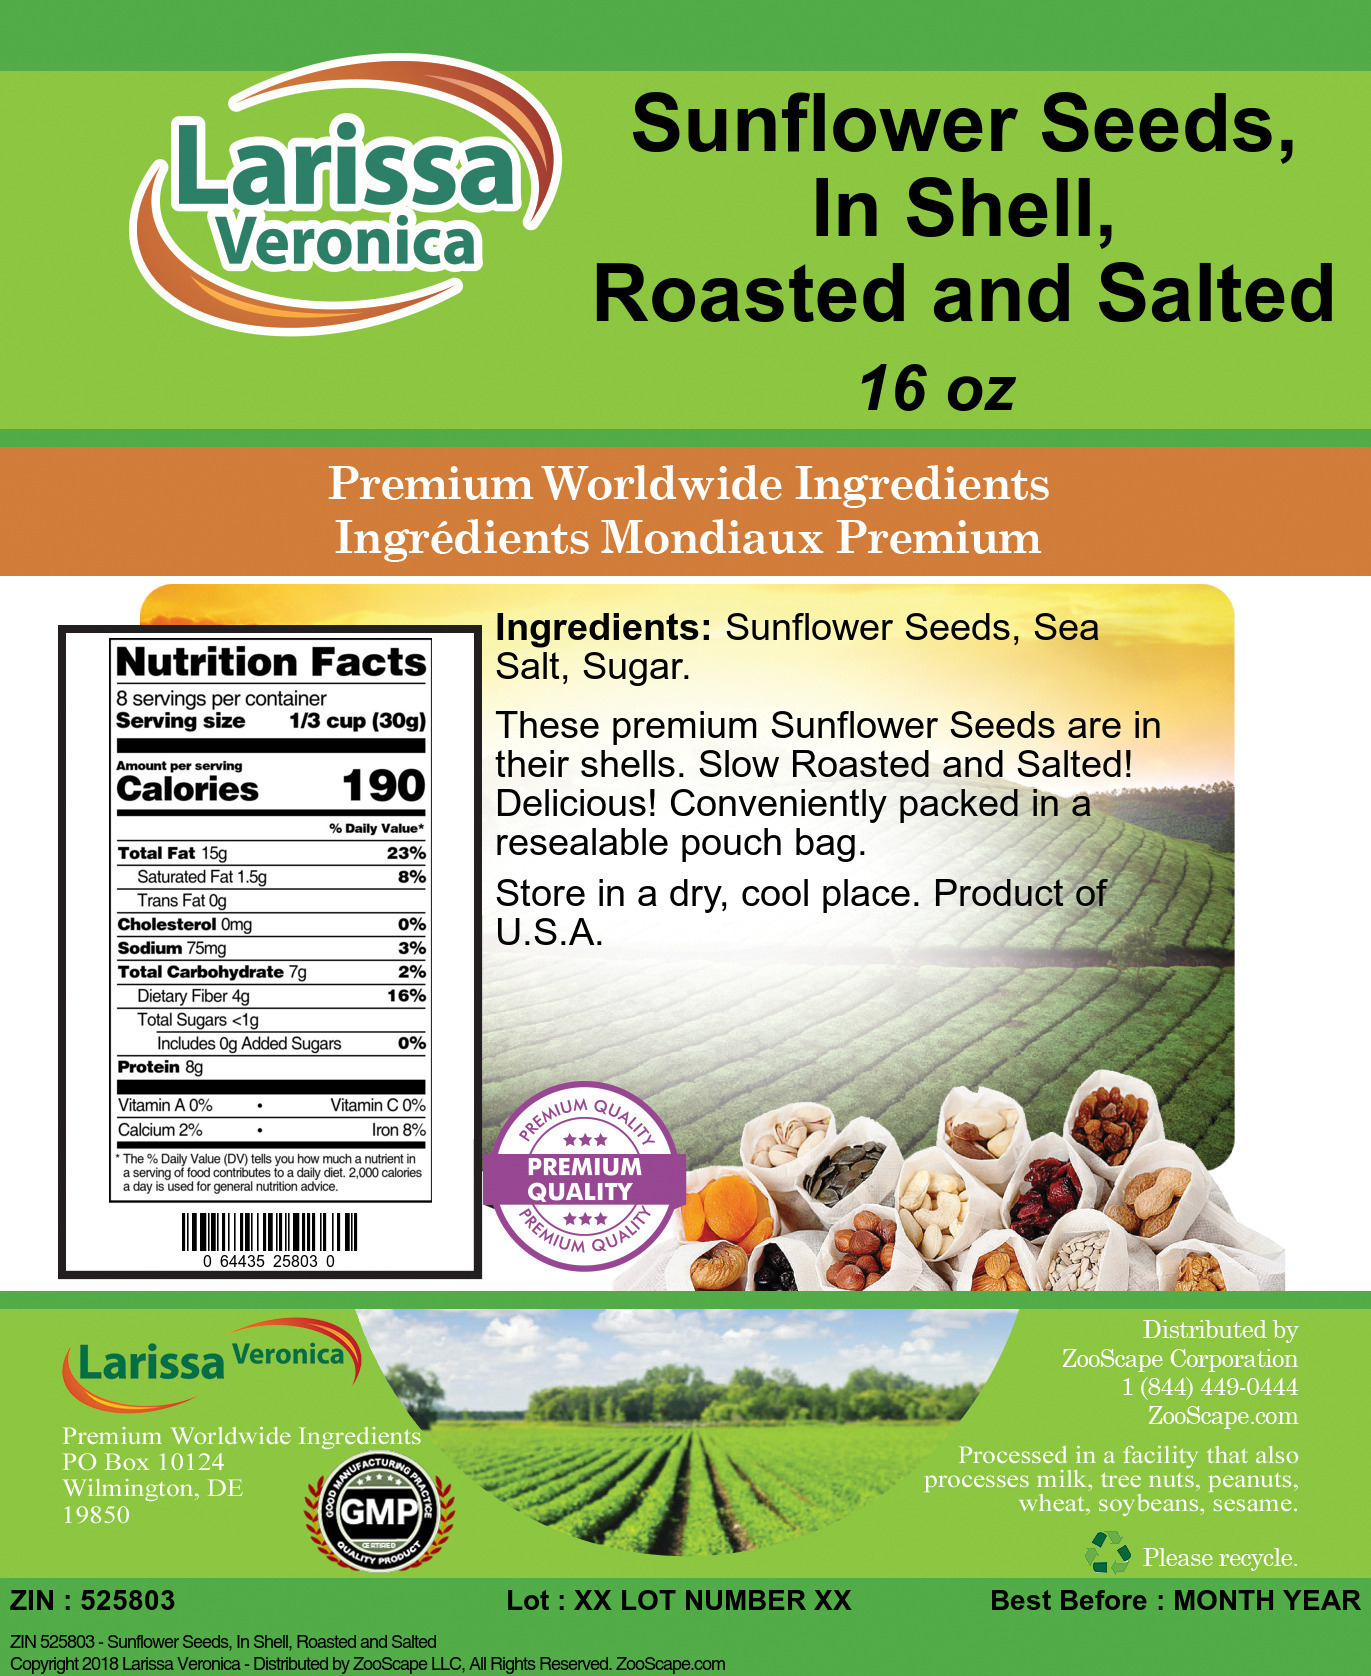 Sunflower Seeds, In Shell, Roasted and Salted - Label